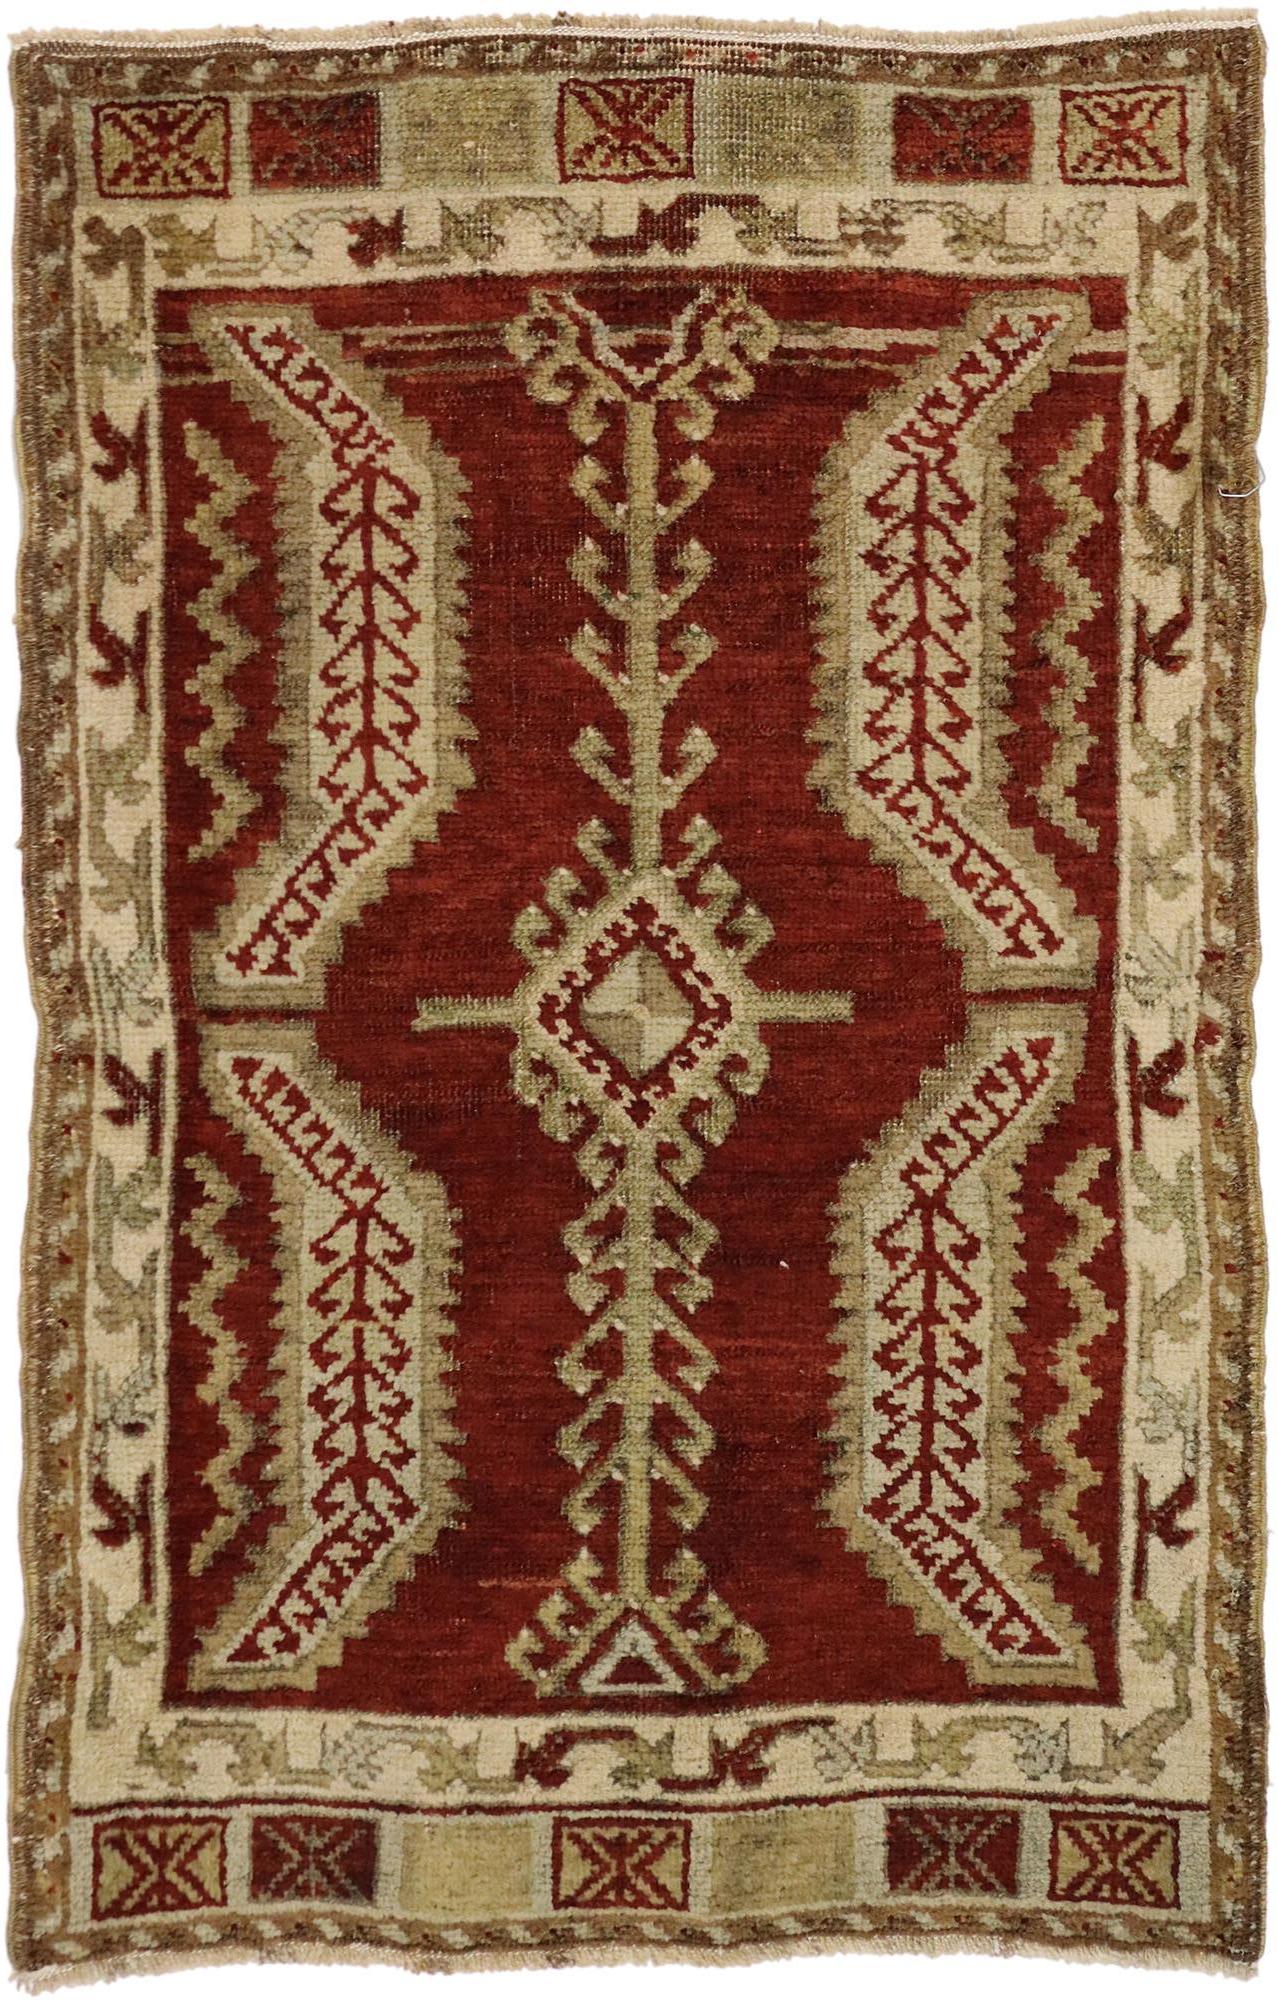 50205 Vintage Turkish Oushak Yastik Scatter Rug, Small Accent Rug 01'10 x 02'10. This hand-knotted wool vintage Turkish Oushak Yastik scatter rug features a diamond lozenge Ram's Horn pole medallion flanked with four serrated leaves patterned with